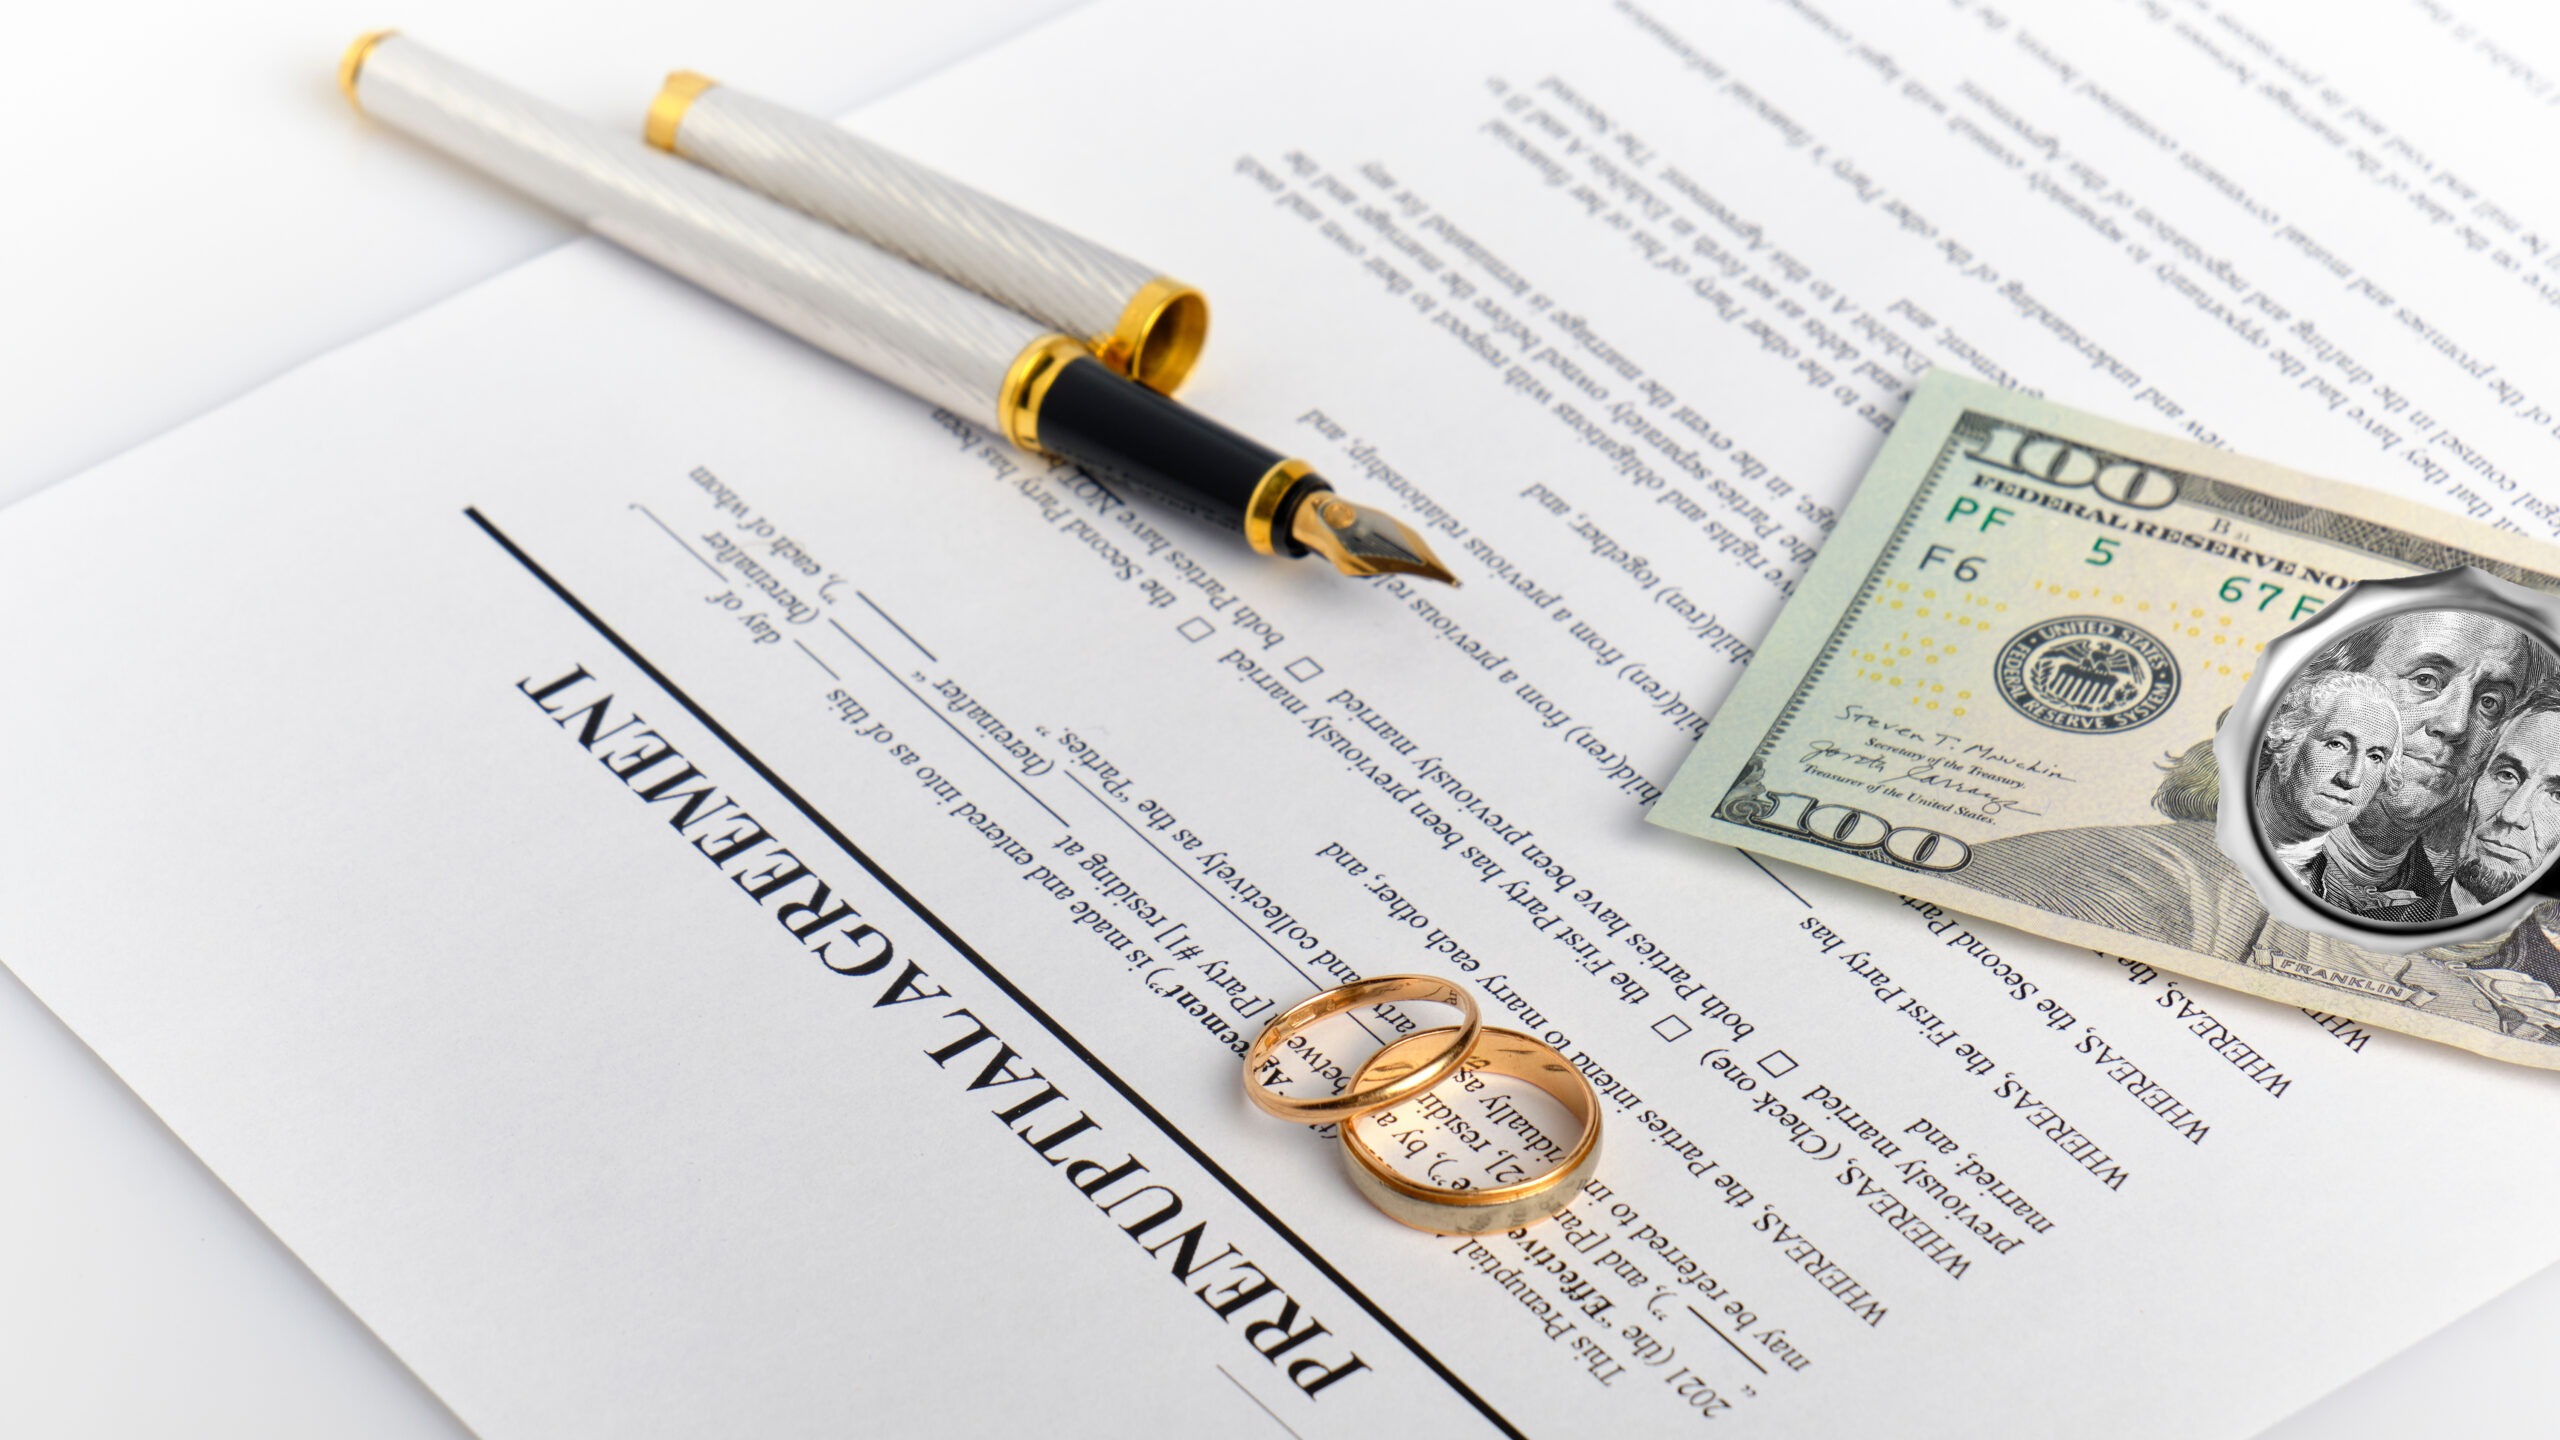 Two golden wedding rings, a pen, and money are sitting on top of a prenup agreement, which is one of the ways you can prevent money and relationship problems.